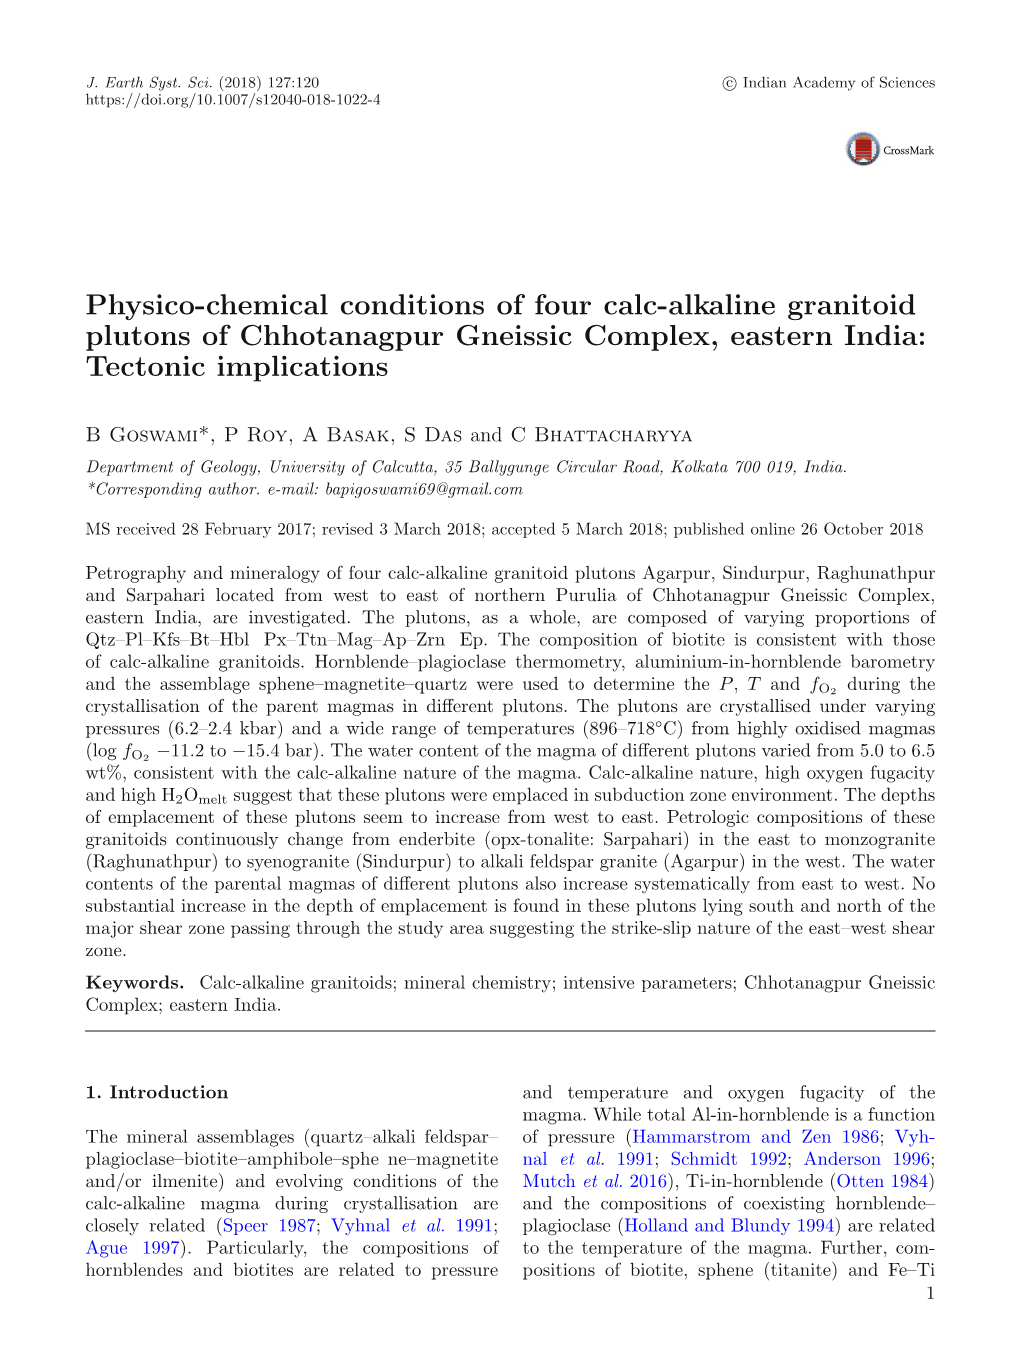 Physico-Chemical Conditions of Four Calc-Alkaline Granitoid Plutons of Chhotanagpur Gneissic Complex, Eastern India: Tectonic Implications